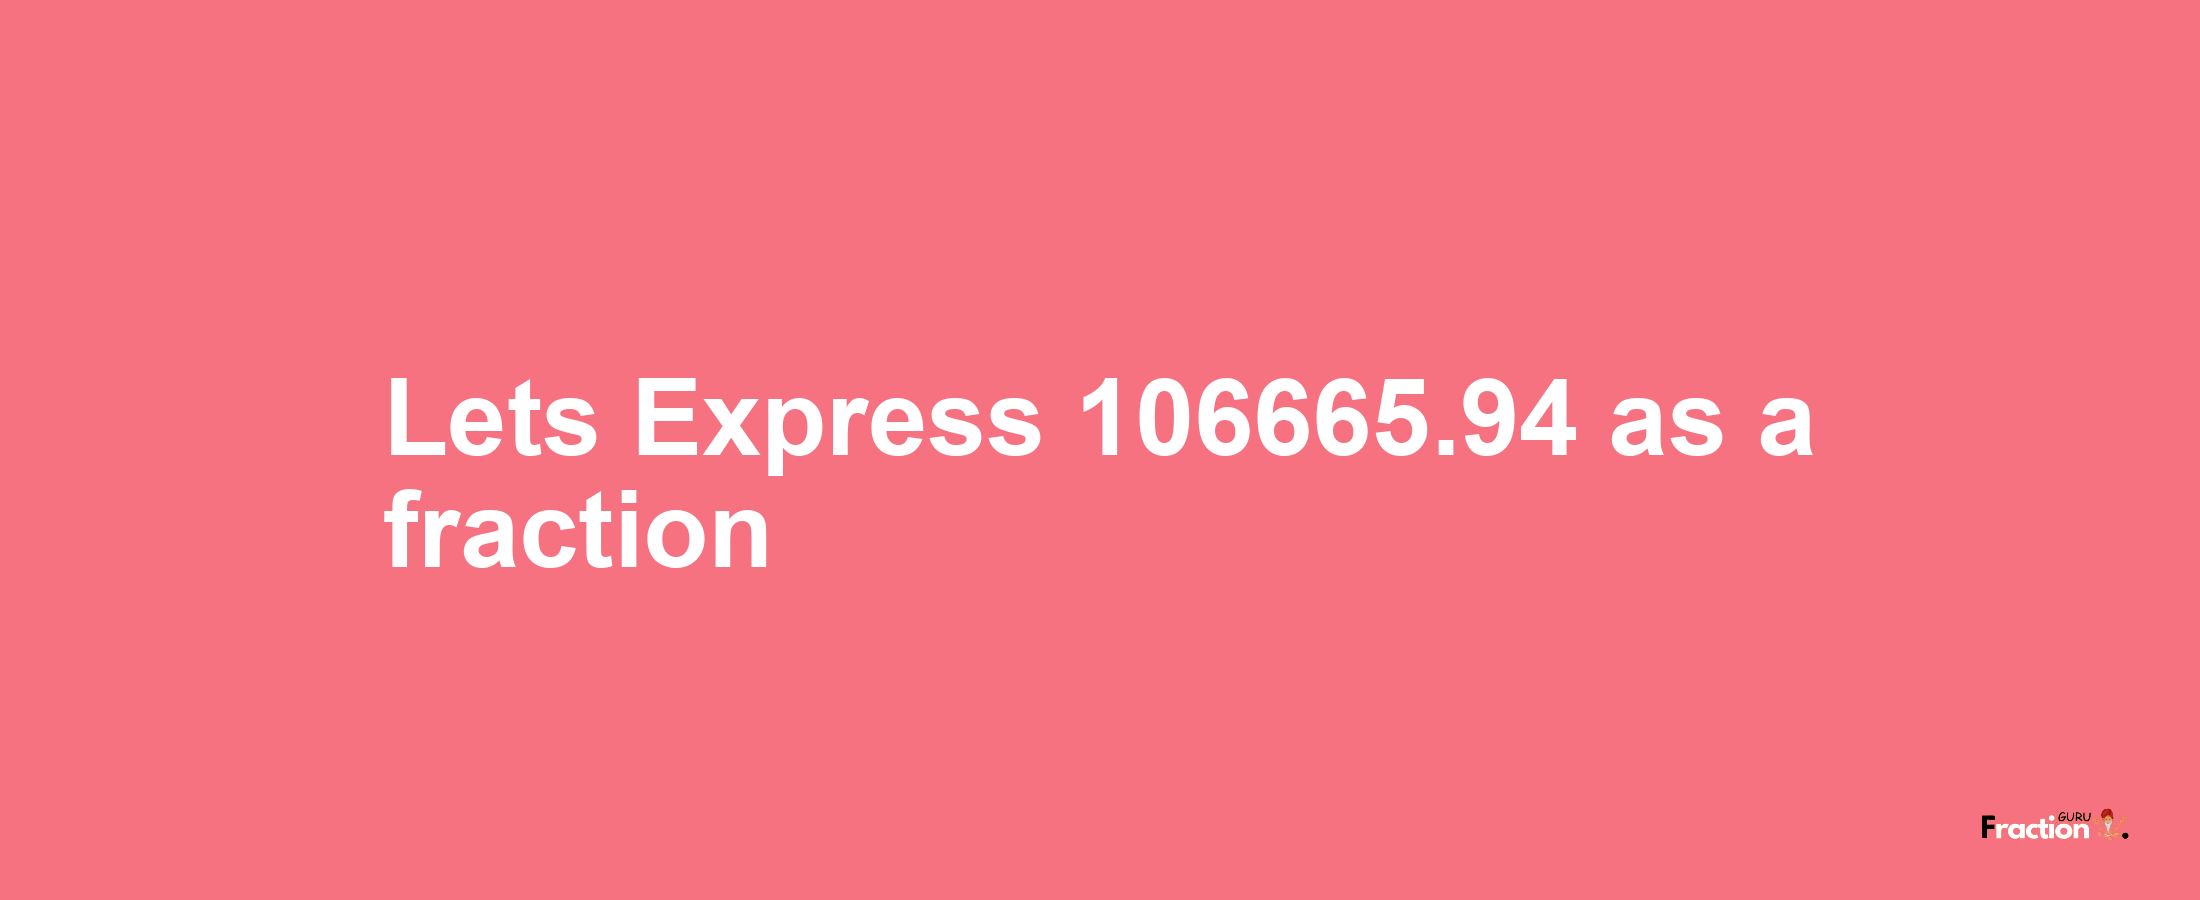 Lets Express 106665.94 as afraction